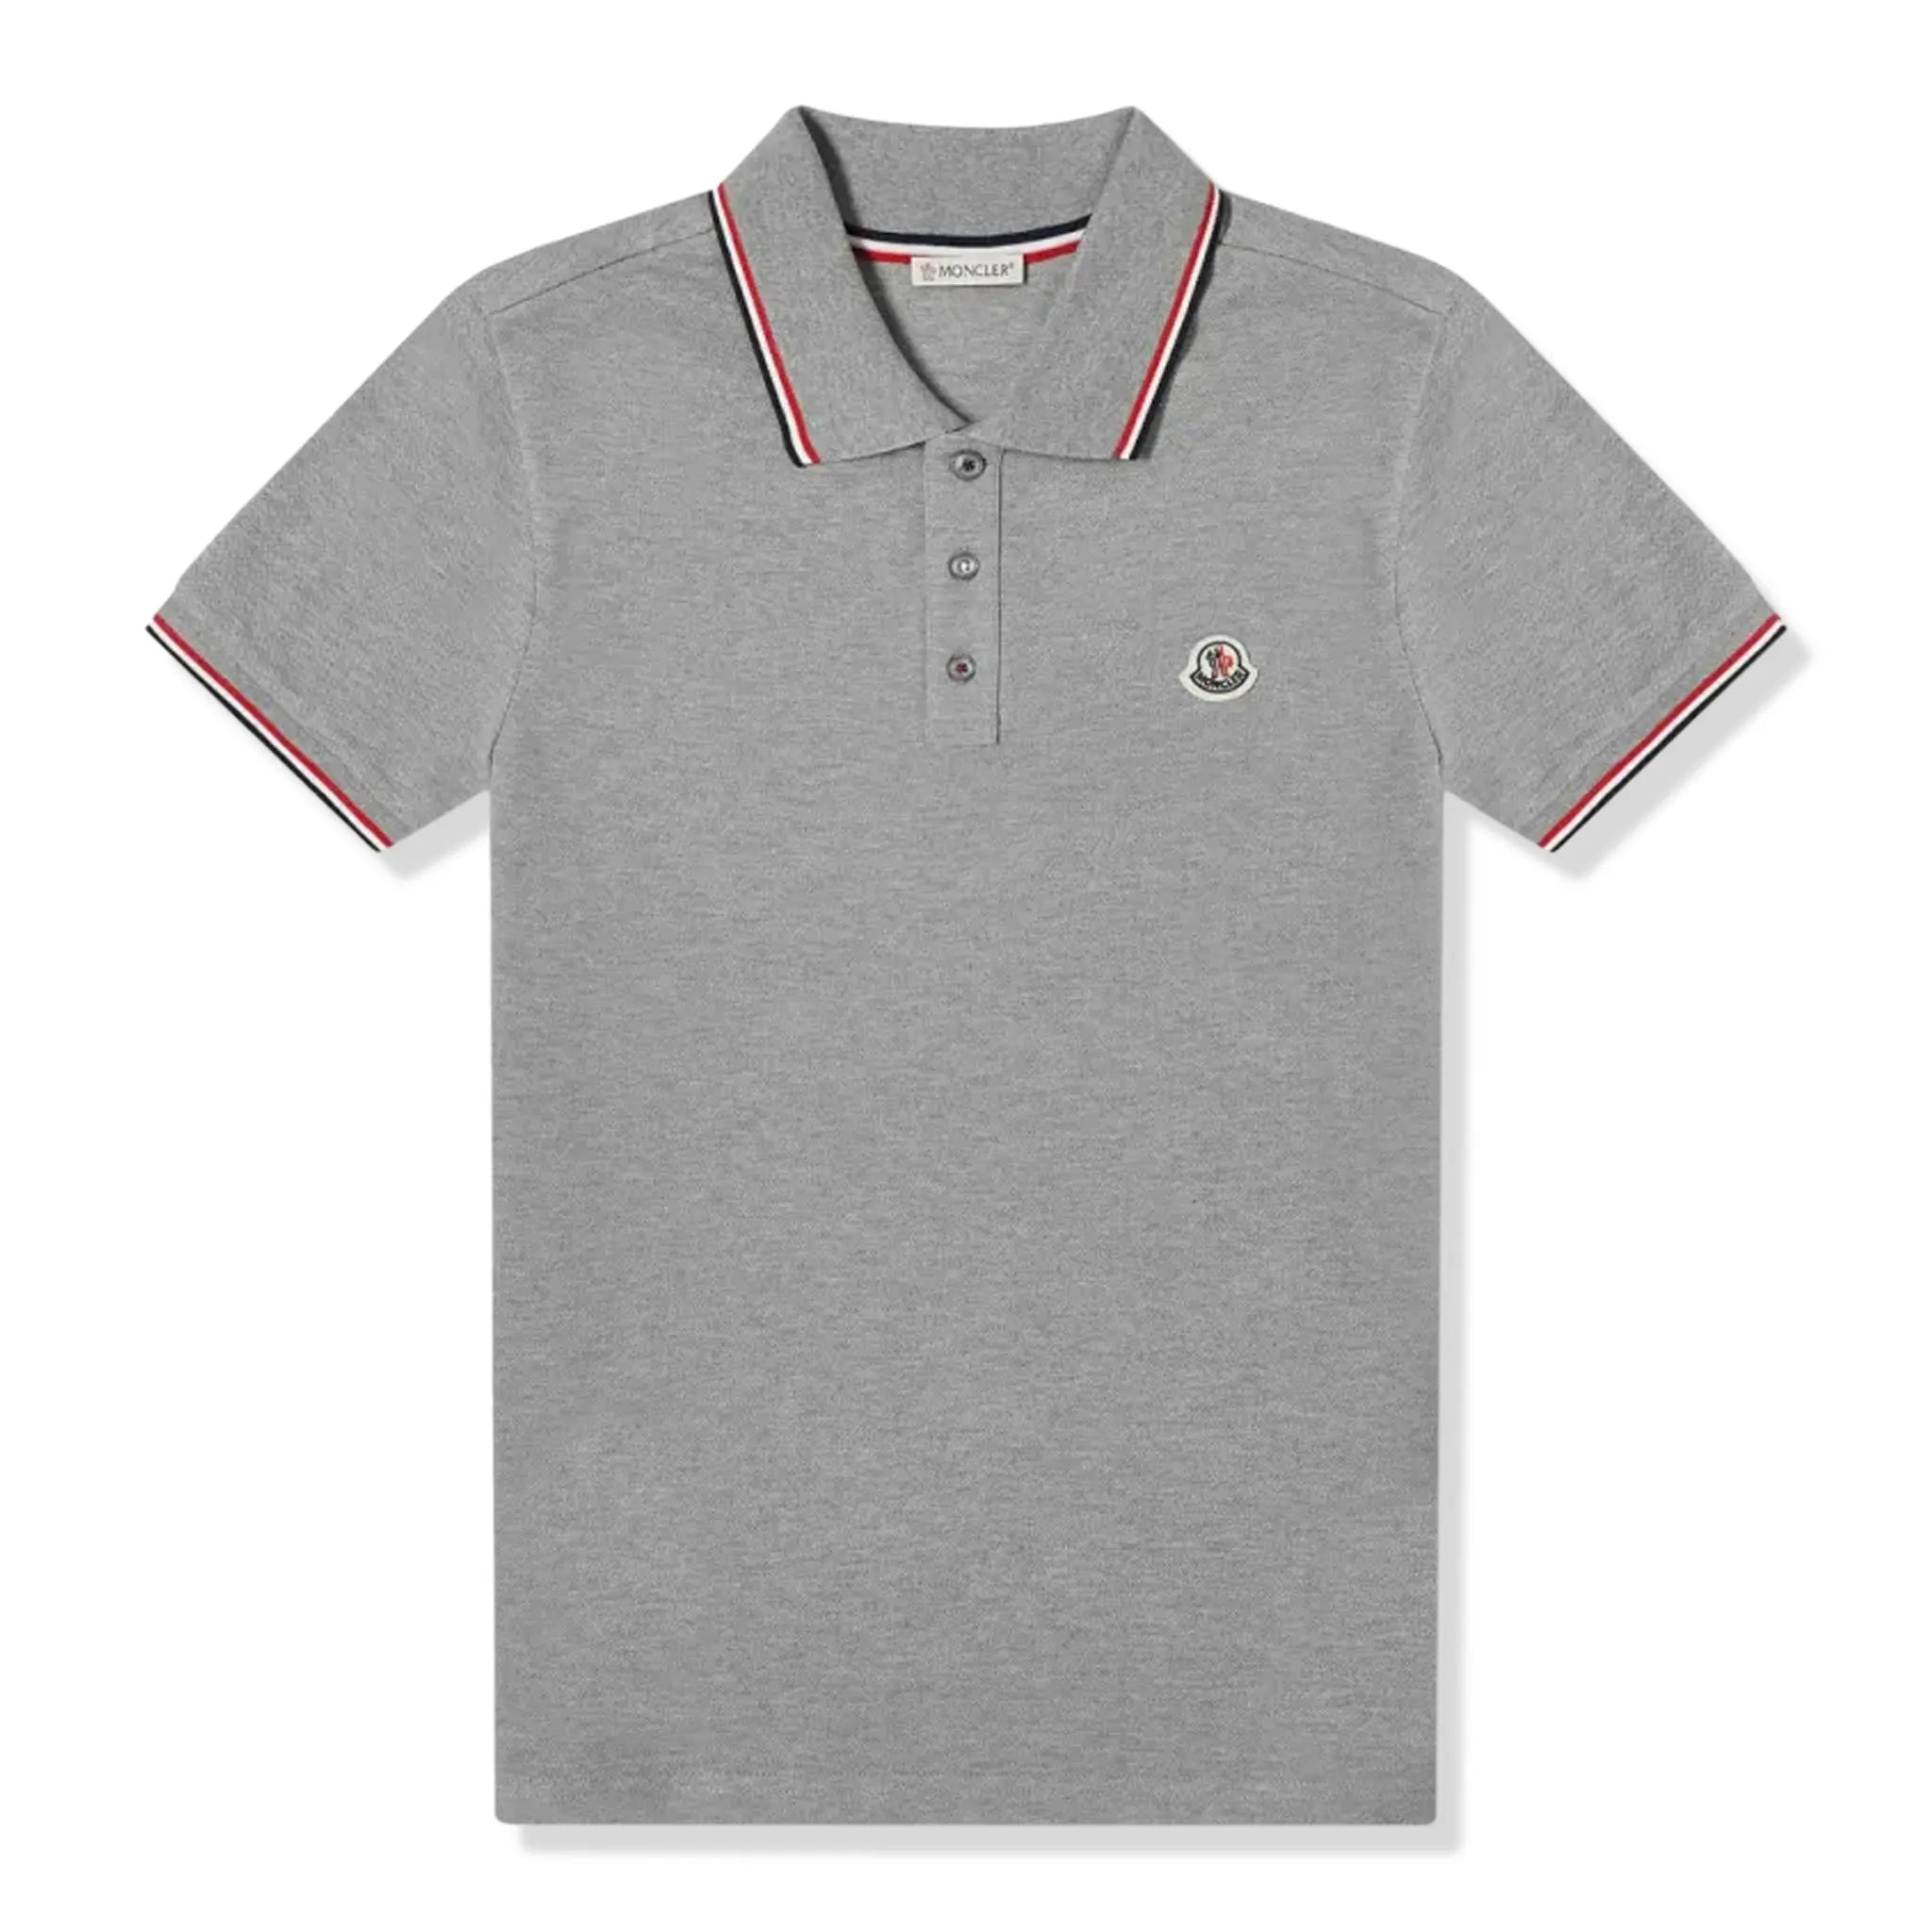 Front view of Moncler Maglia Light Grey Polo Shirt lange J10918A0002484556984